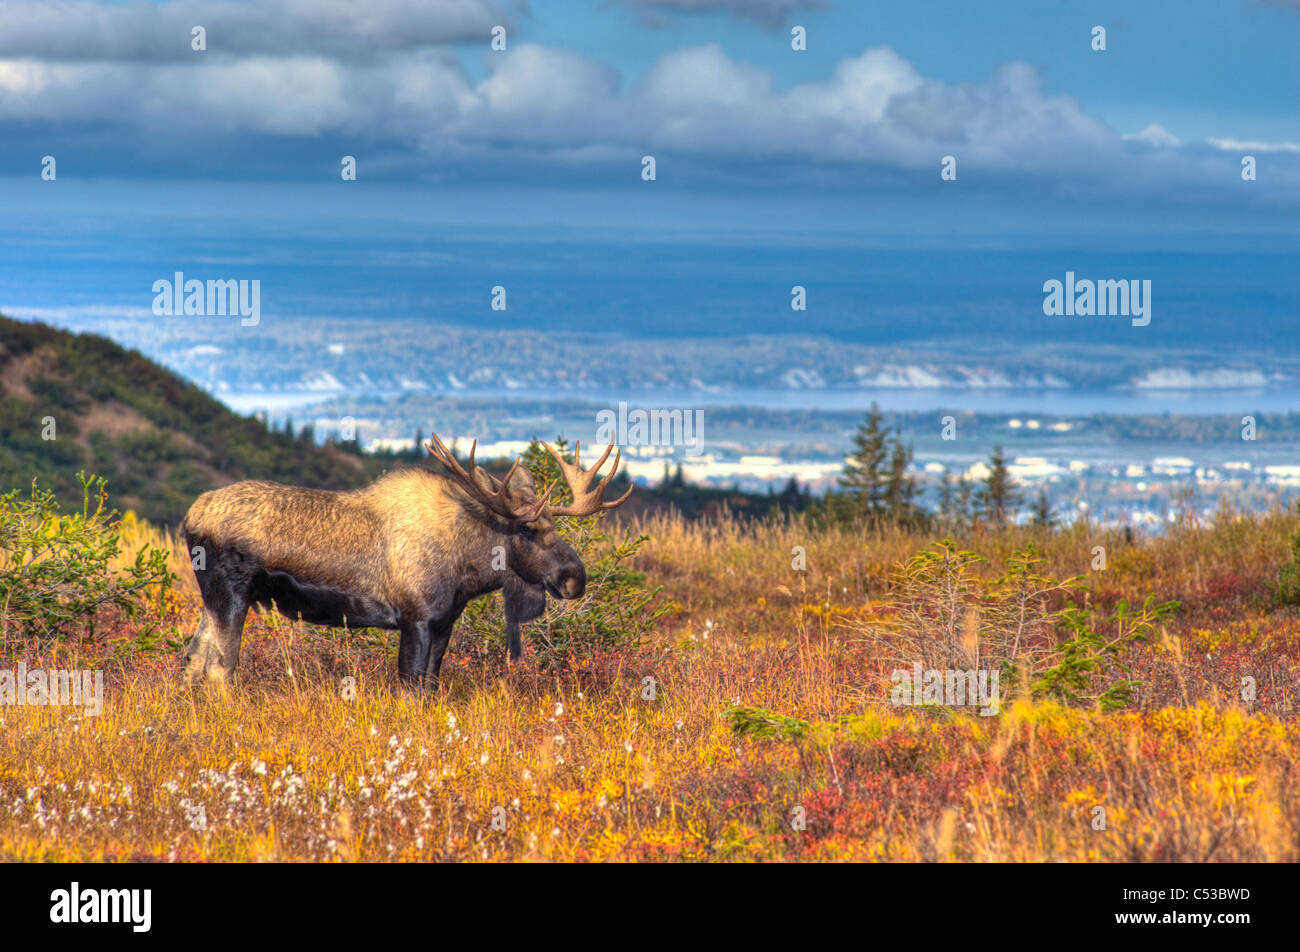 Bull moose in rut near Powerline Pass in Chugach State Park with the city of Anchorage in the backgound, Alaska, HDR Stock Photo